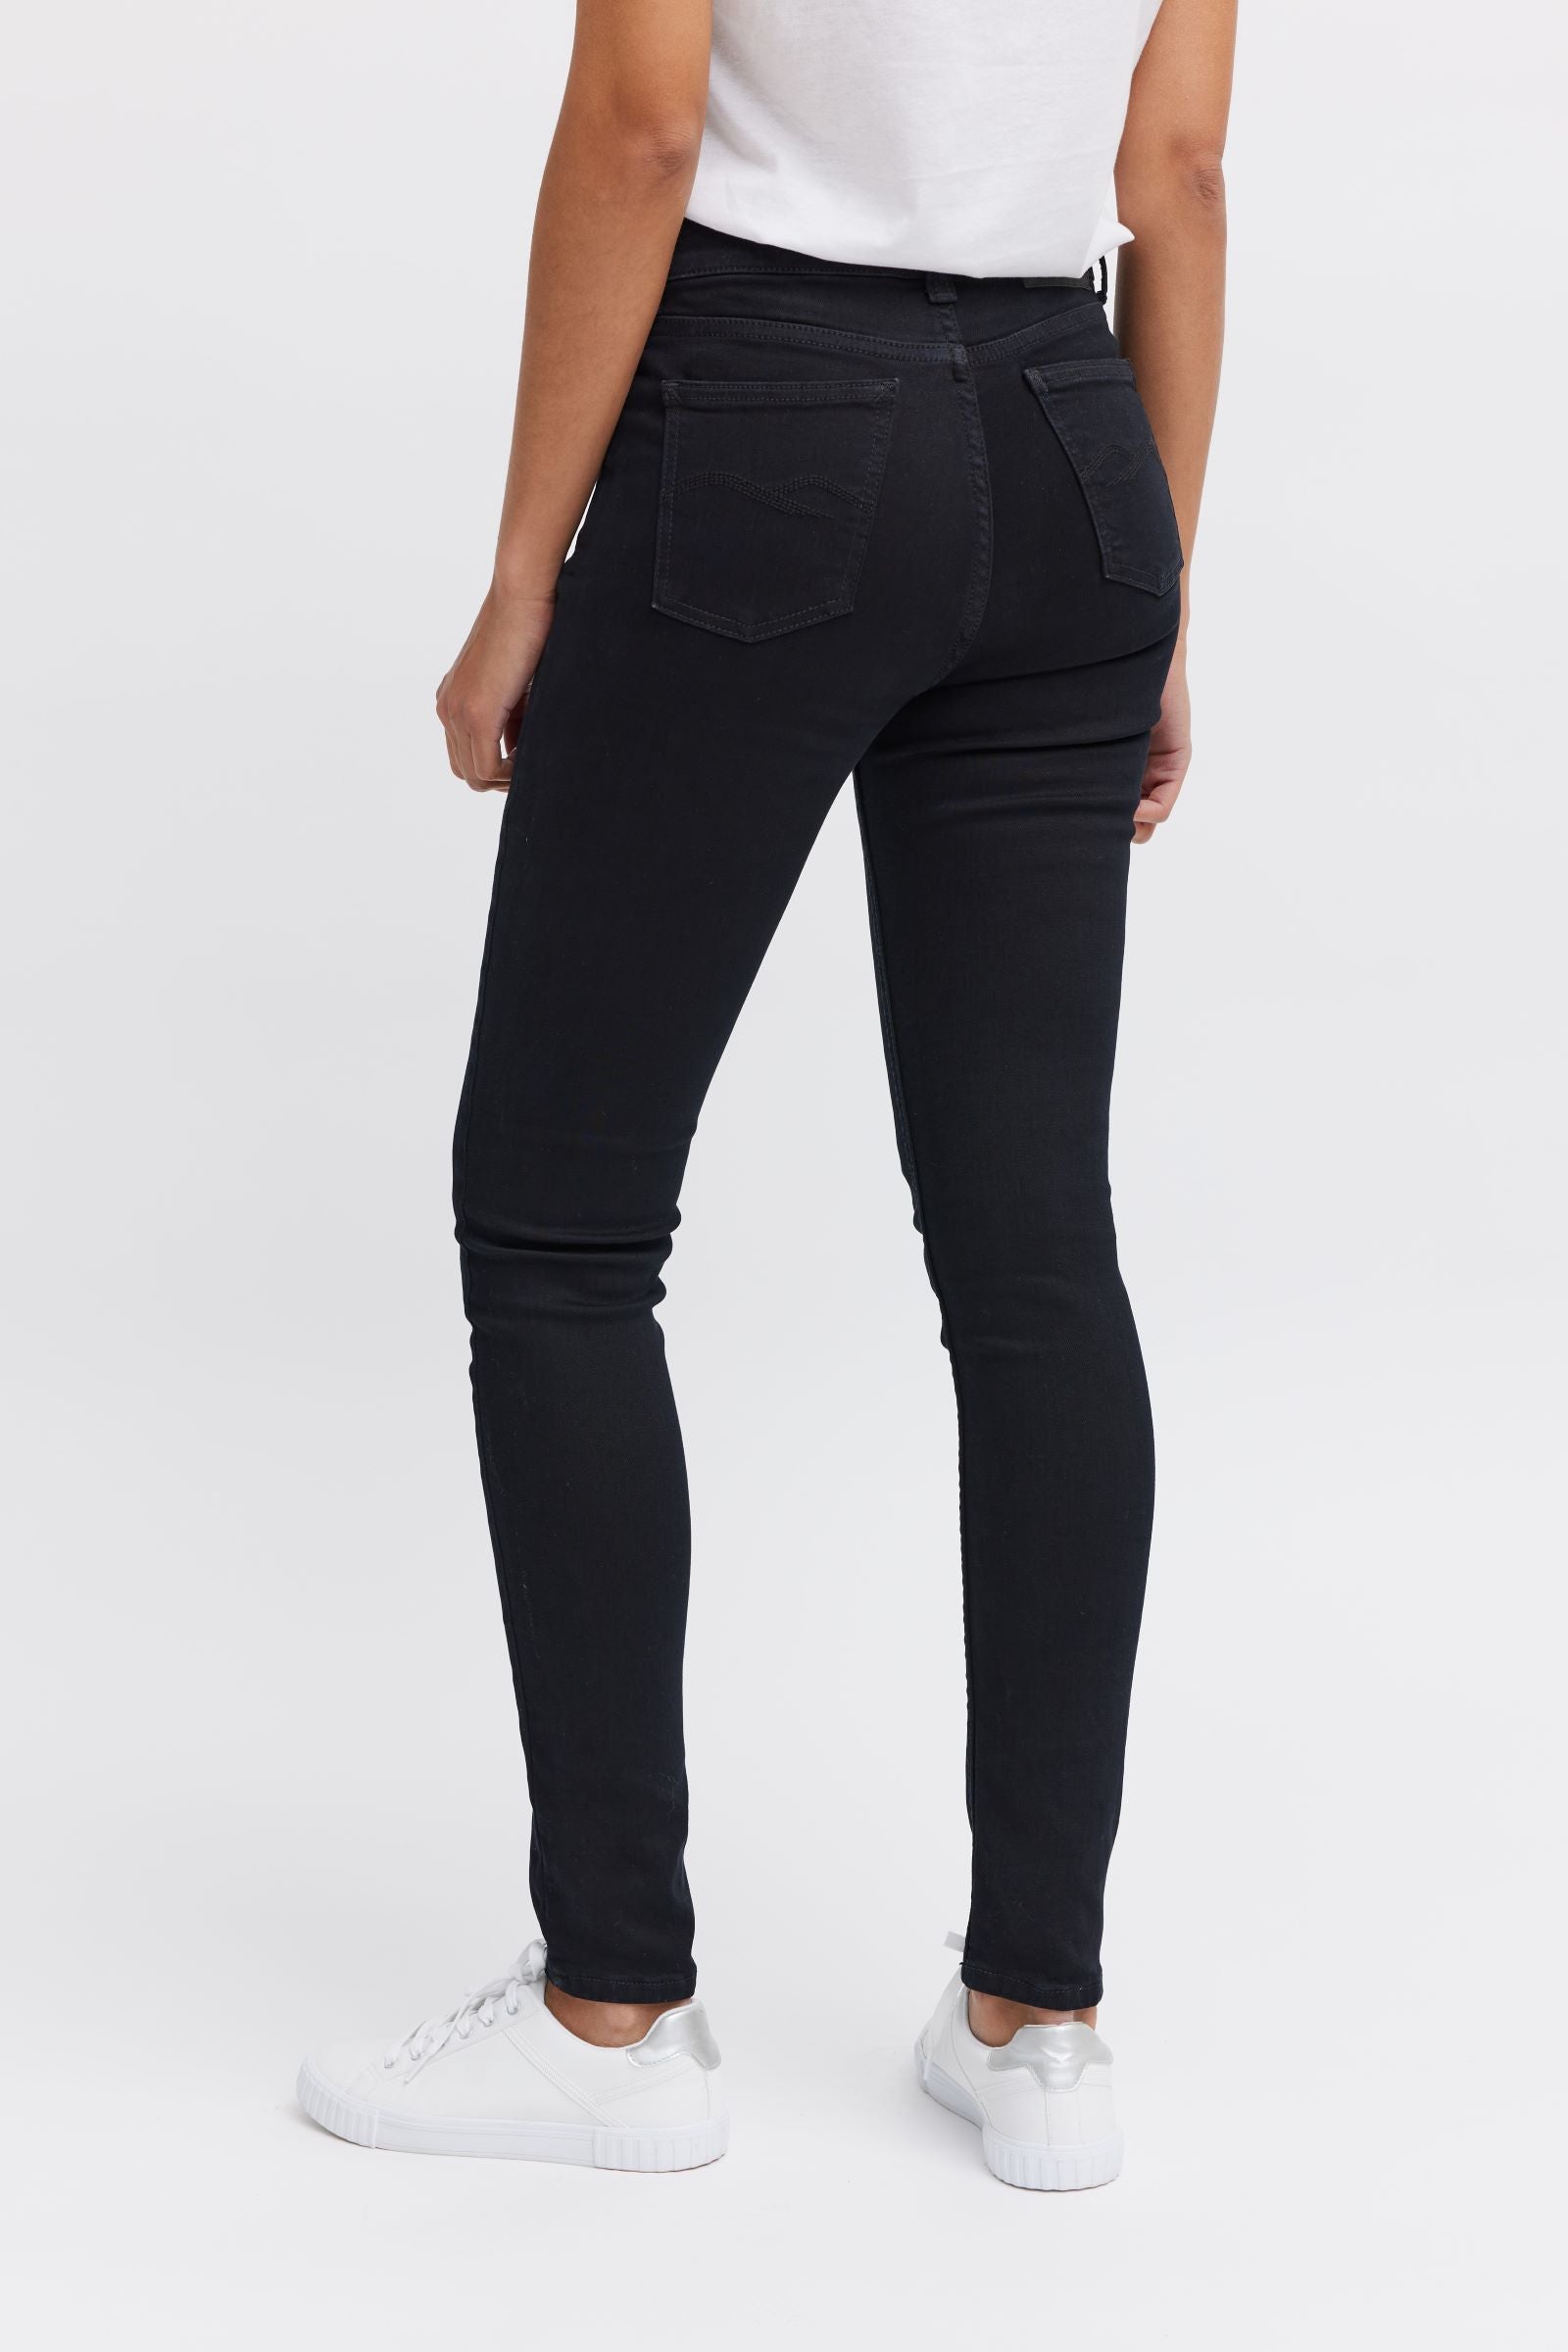 Sustainable fashion black jeans - Women's skinny fit